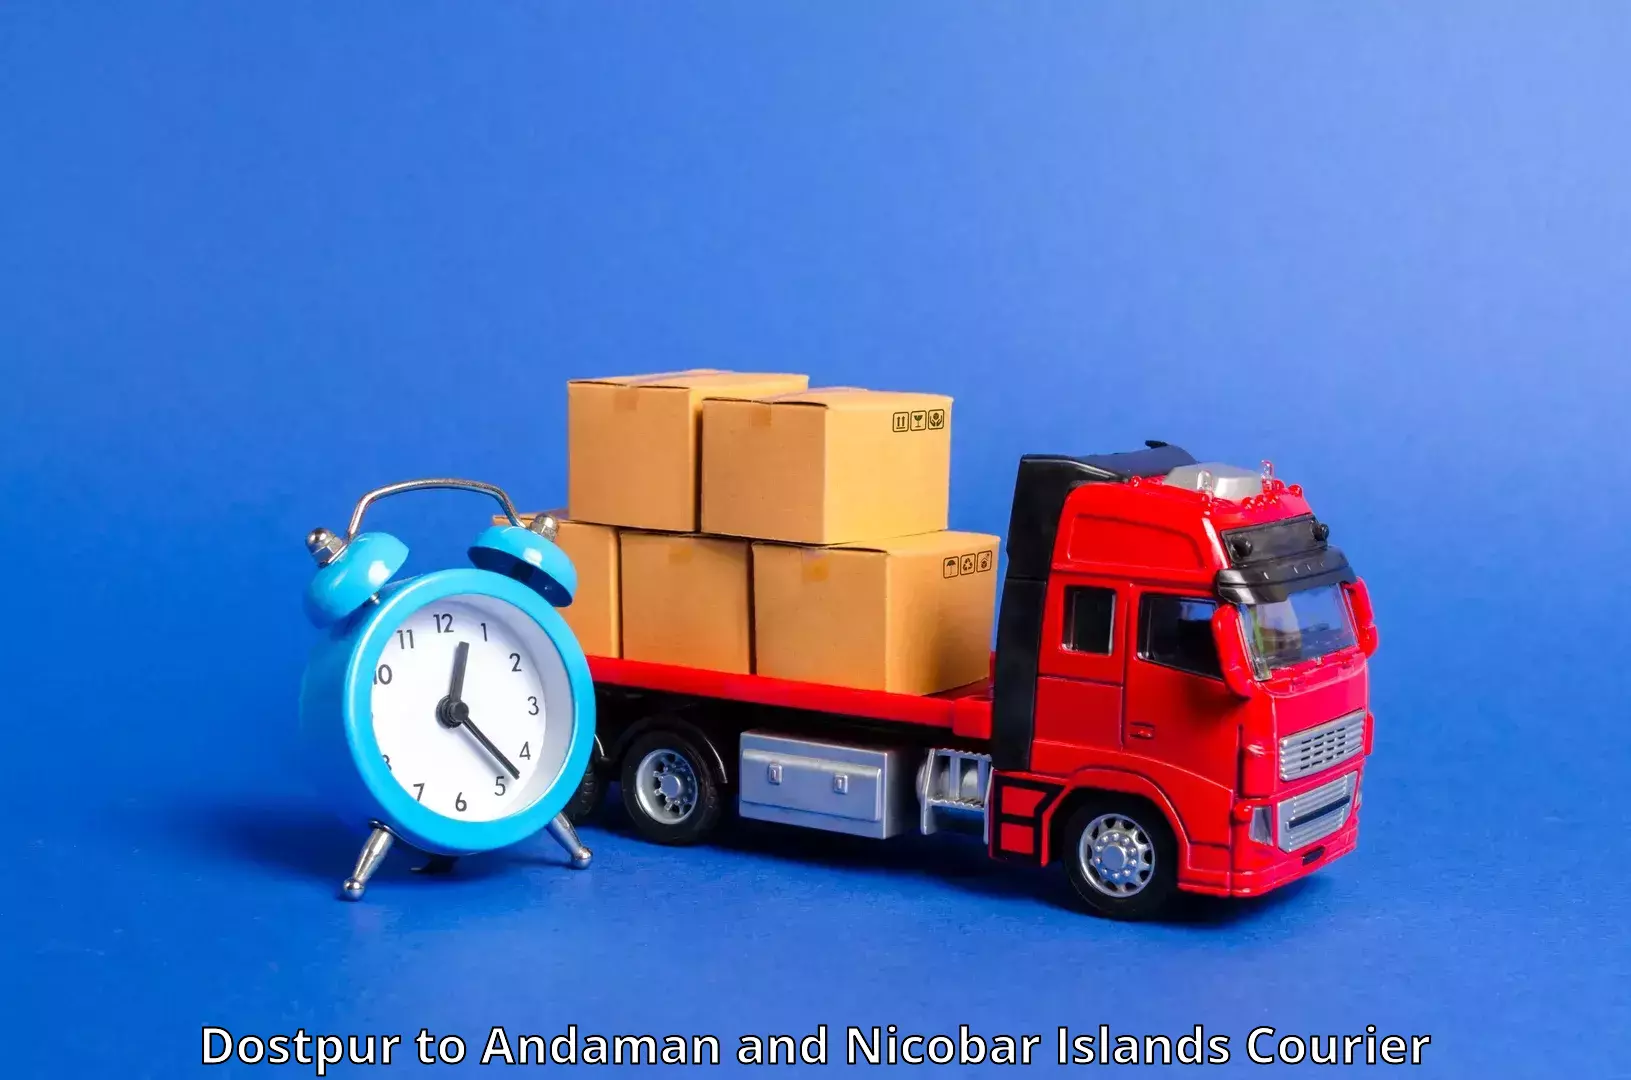 Courier service partnerships in Dostpur to Andaman and Nicobar Islands